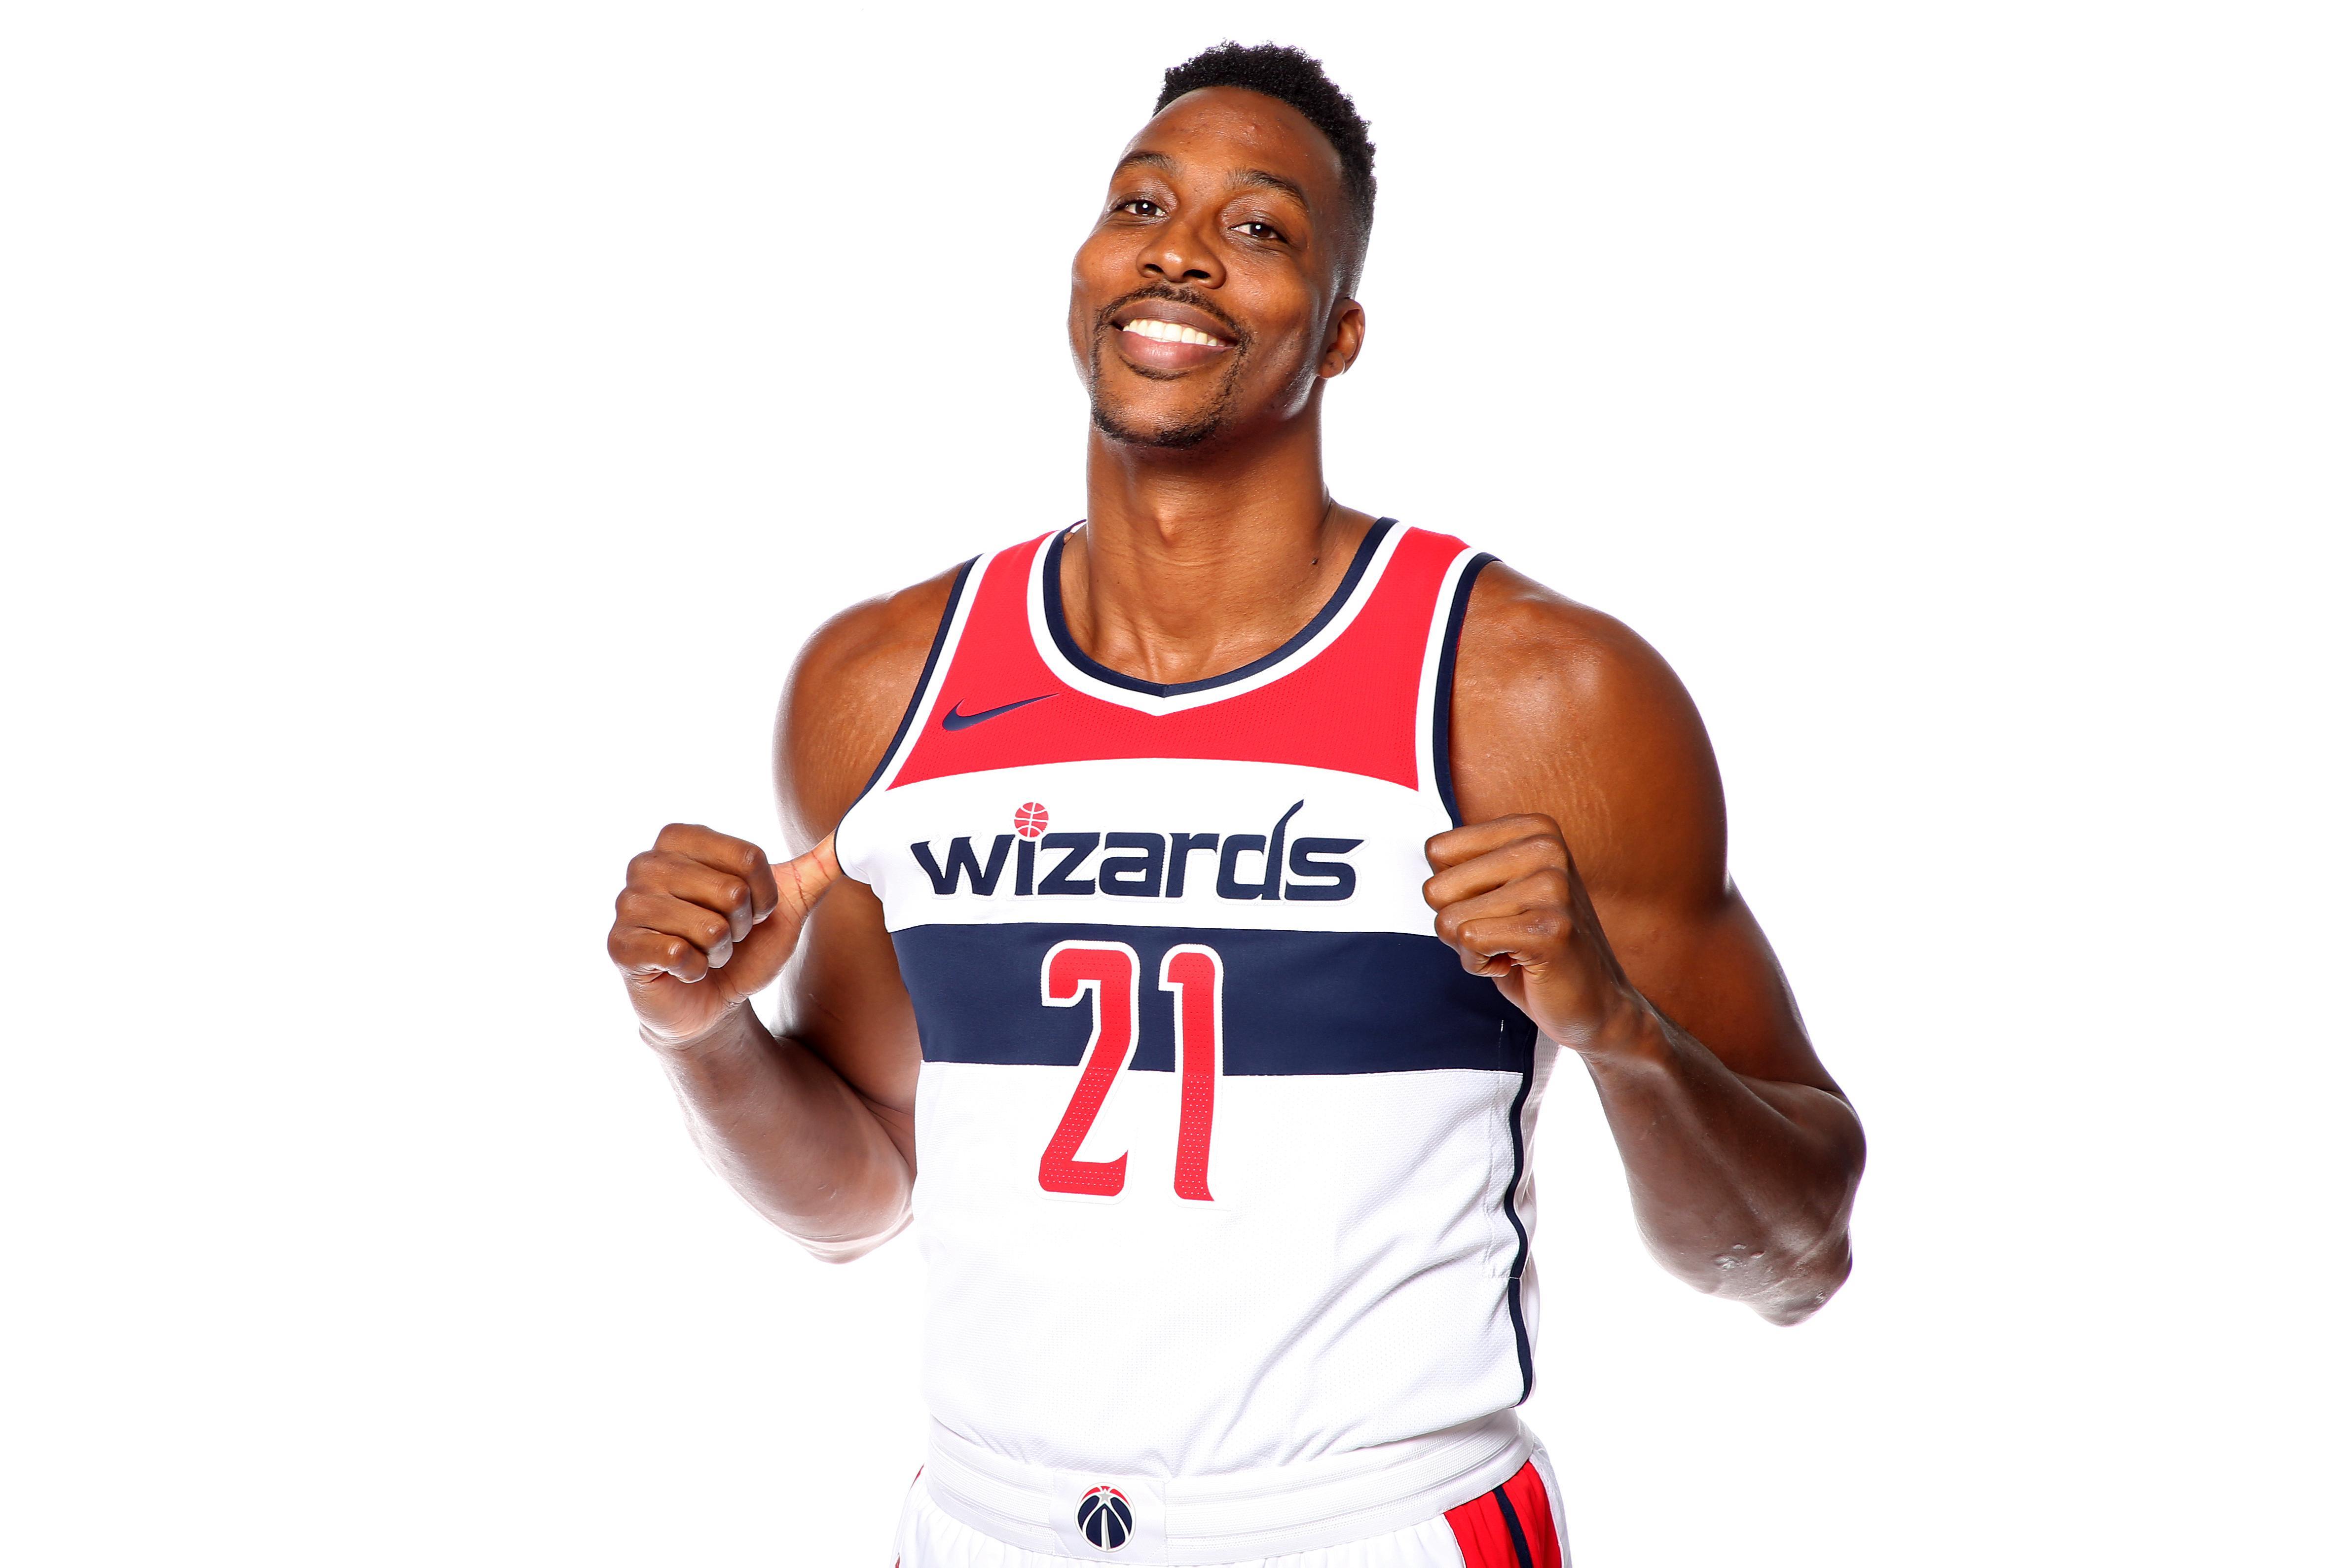 Washington Wizards give enigmatic Dwight Howard (latest) new chance